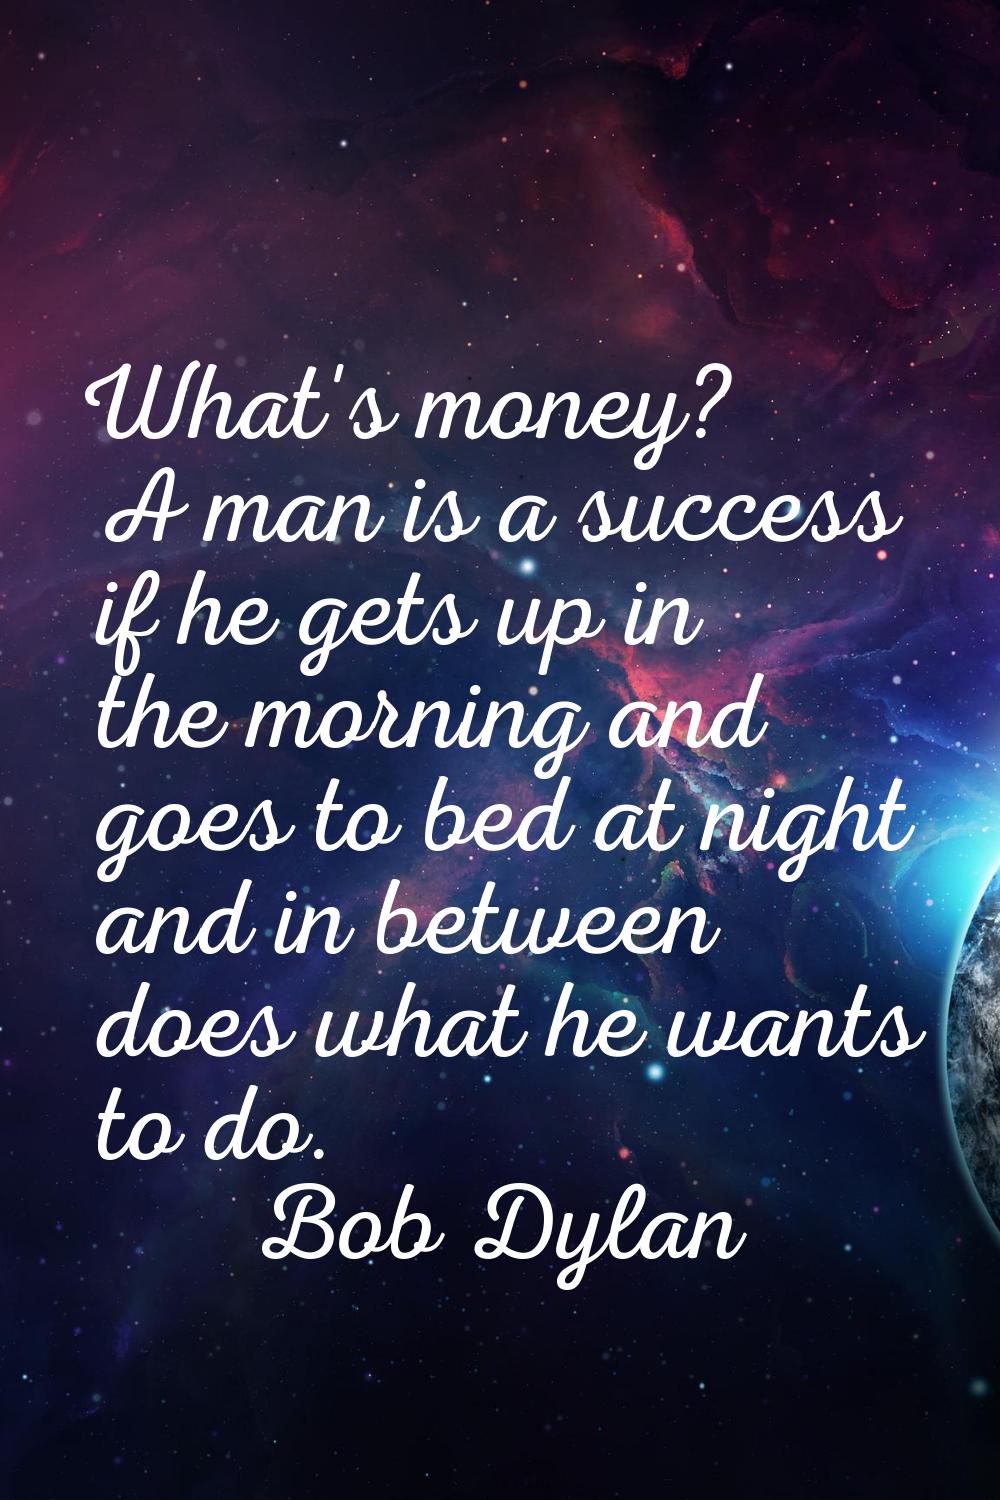 What's money? A man is a success if he gets up in the morning and goes to bed at night and in betwe